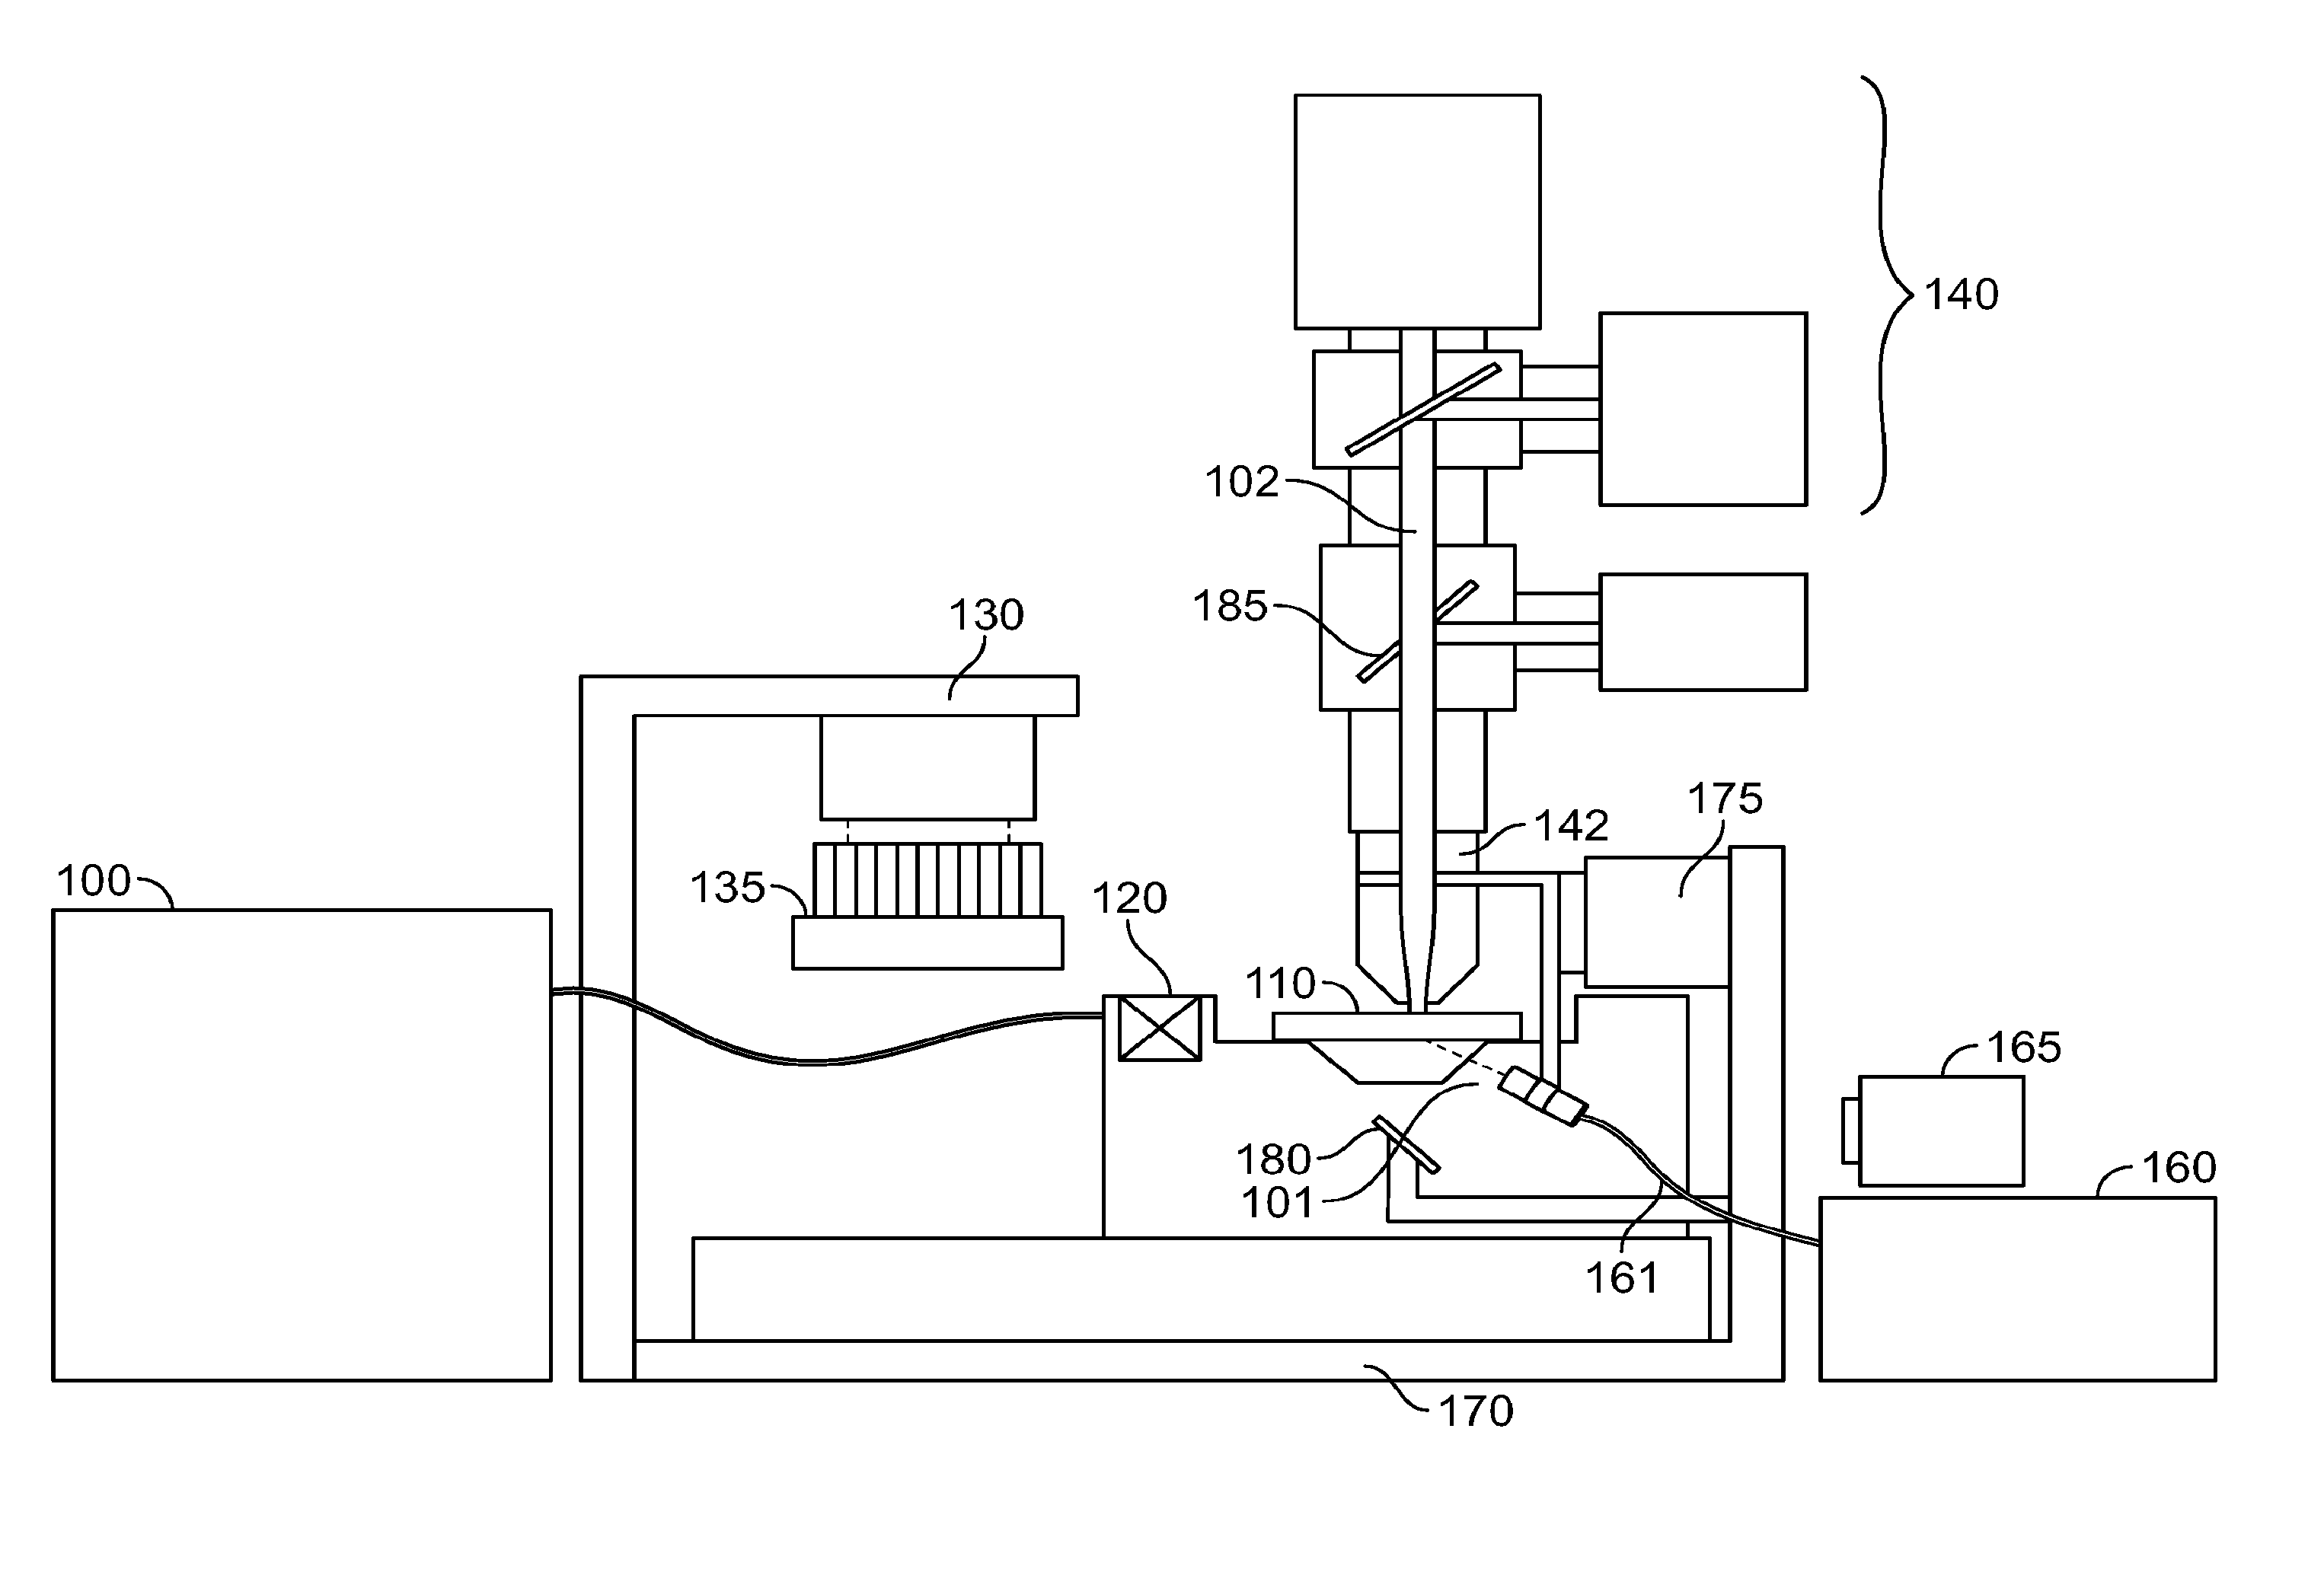 Fluorescence excitation and detection system and method